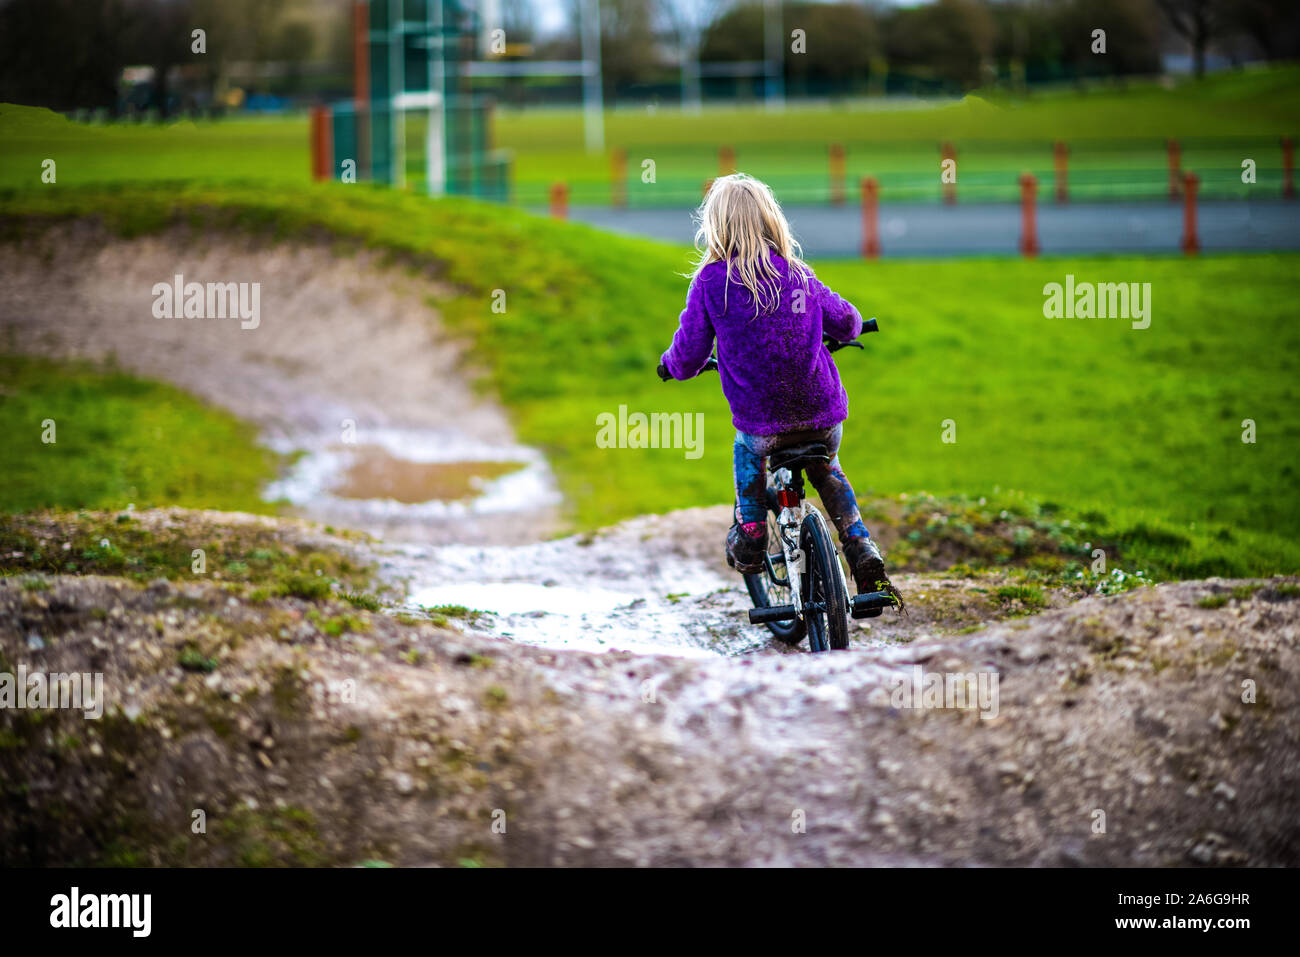 A pretty little girl with blonde hair and a purple jumper enjoys a day at a BMX track, riding and practicing tricks, child in the countryside UK Stock Photo